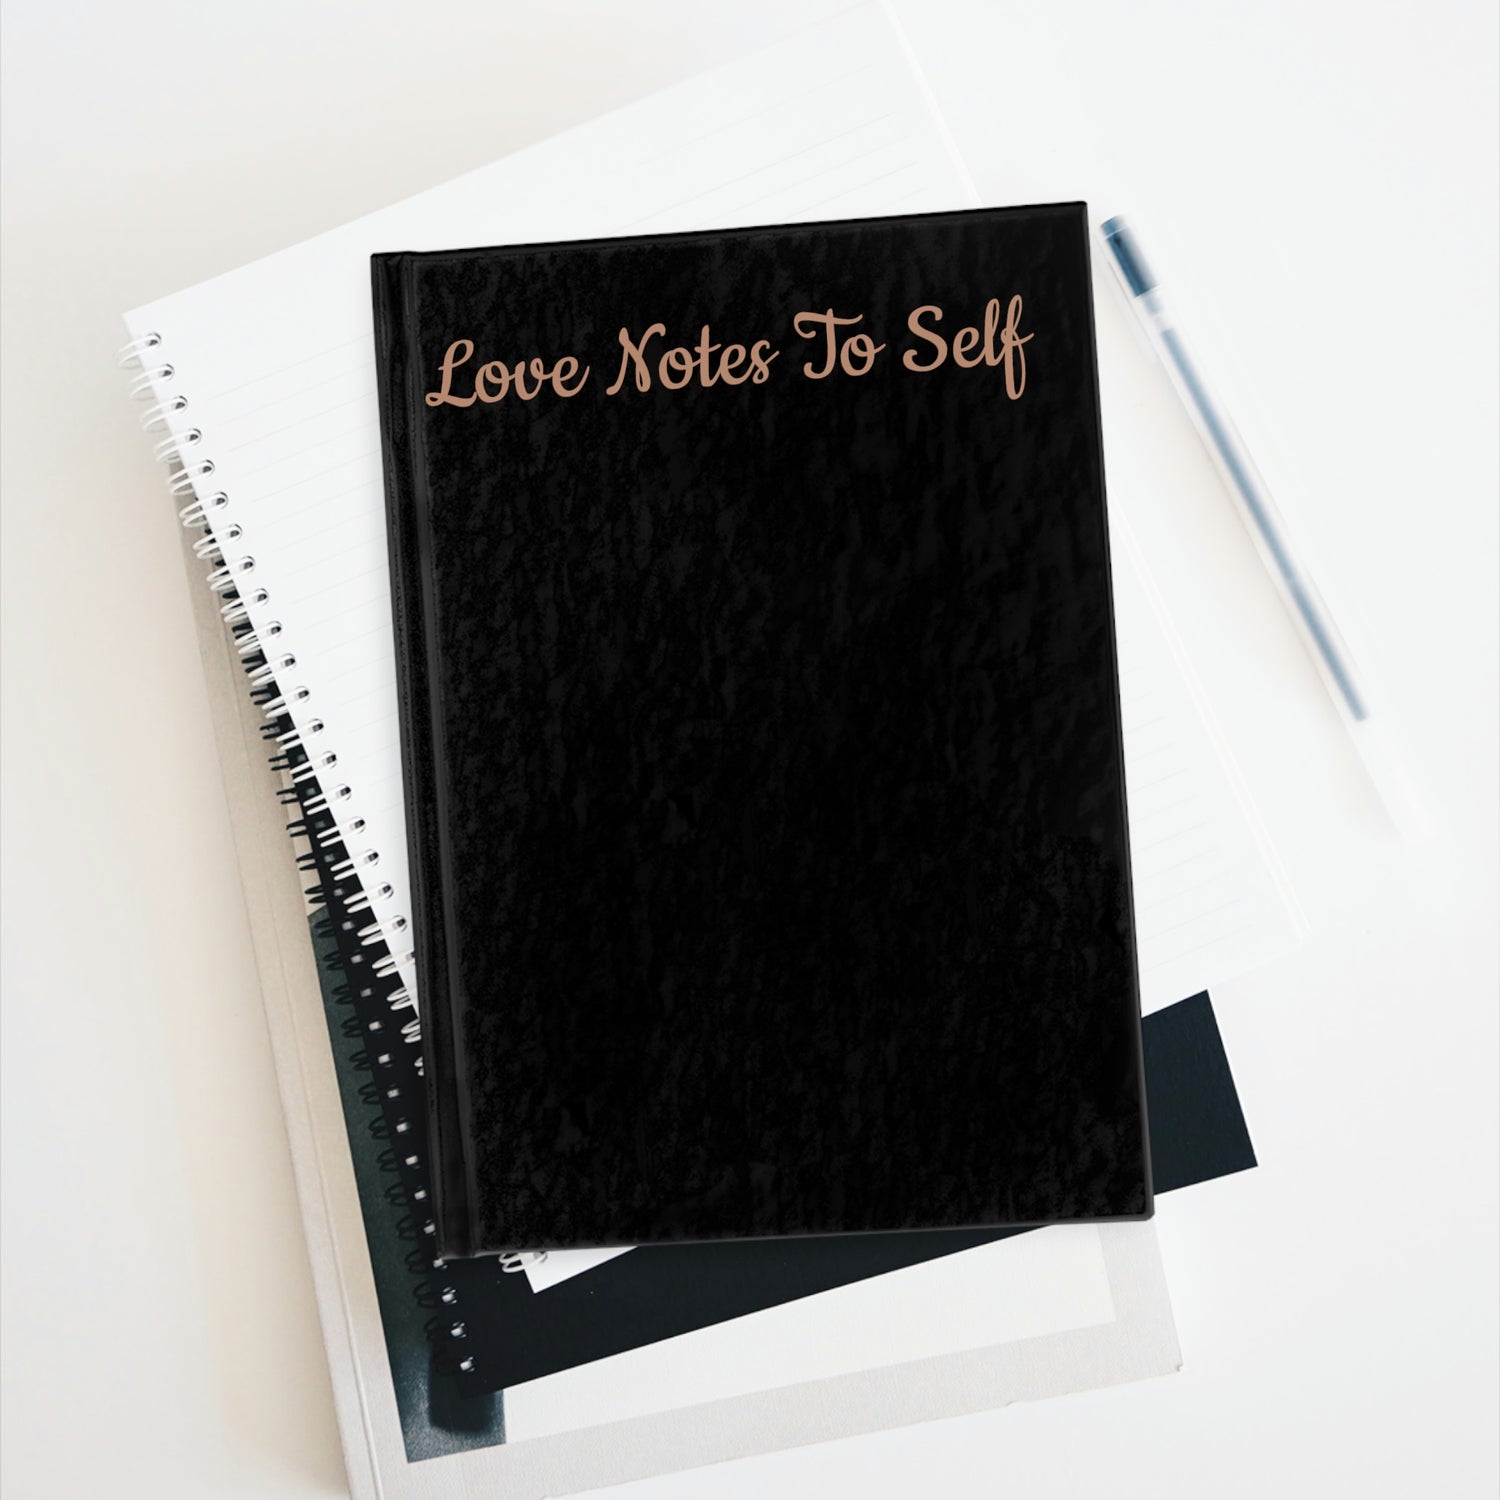 Love Notes To Self - in black - Journal - Ruled Line